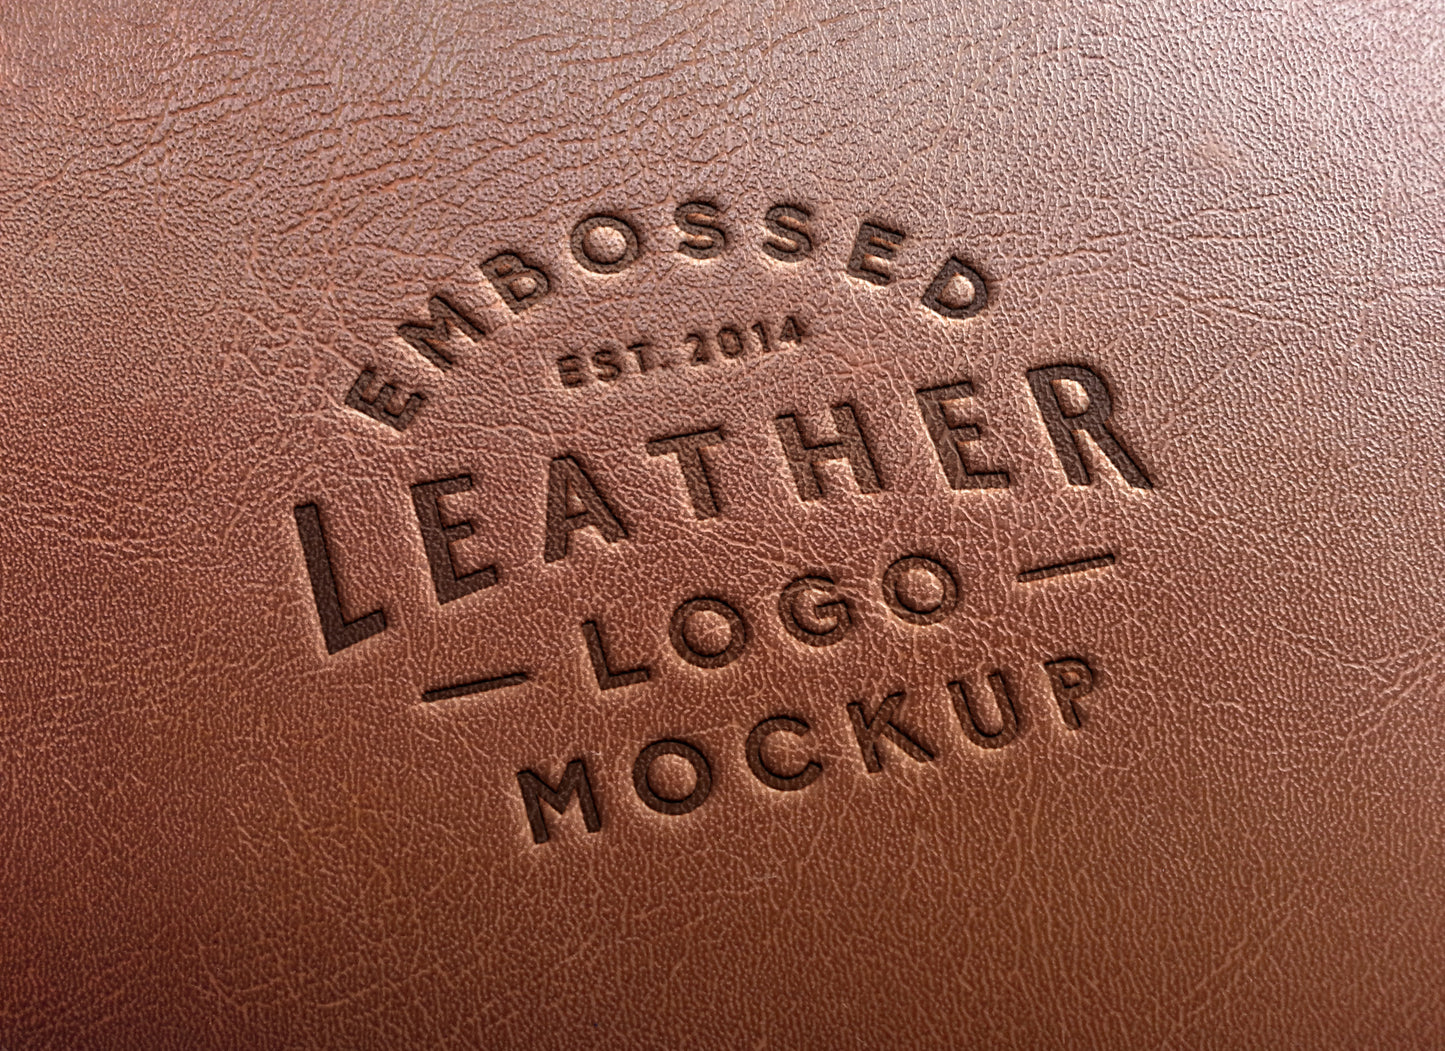 Free Close-Up Leather Stamping Logo PSD MockUp